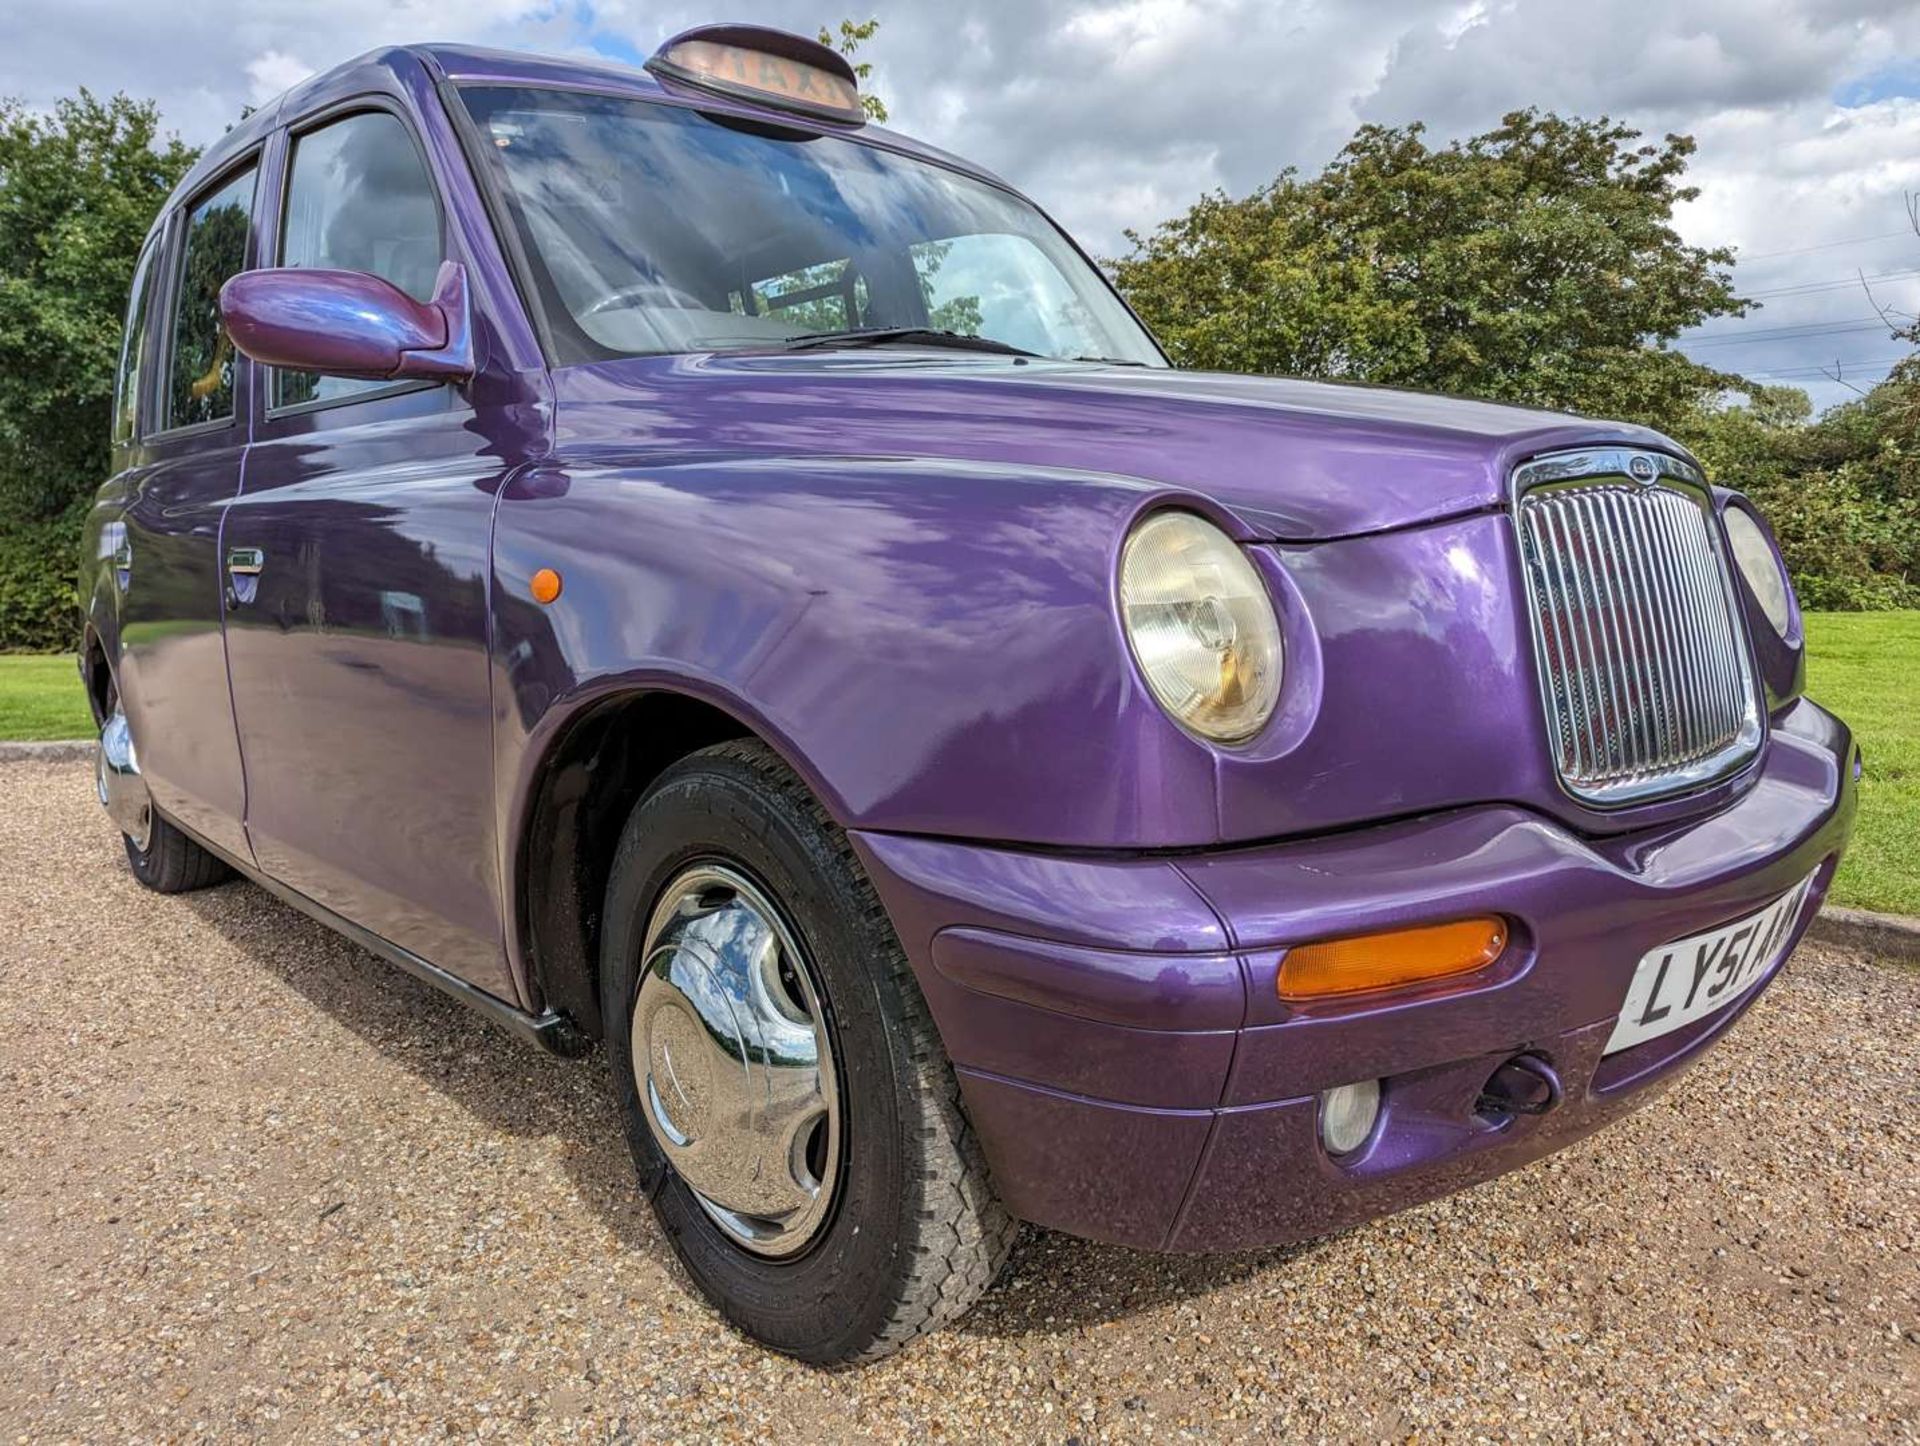 2002 LONDON TAXIS INT TX1 LPG/FUEL - Image 9 of 30